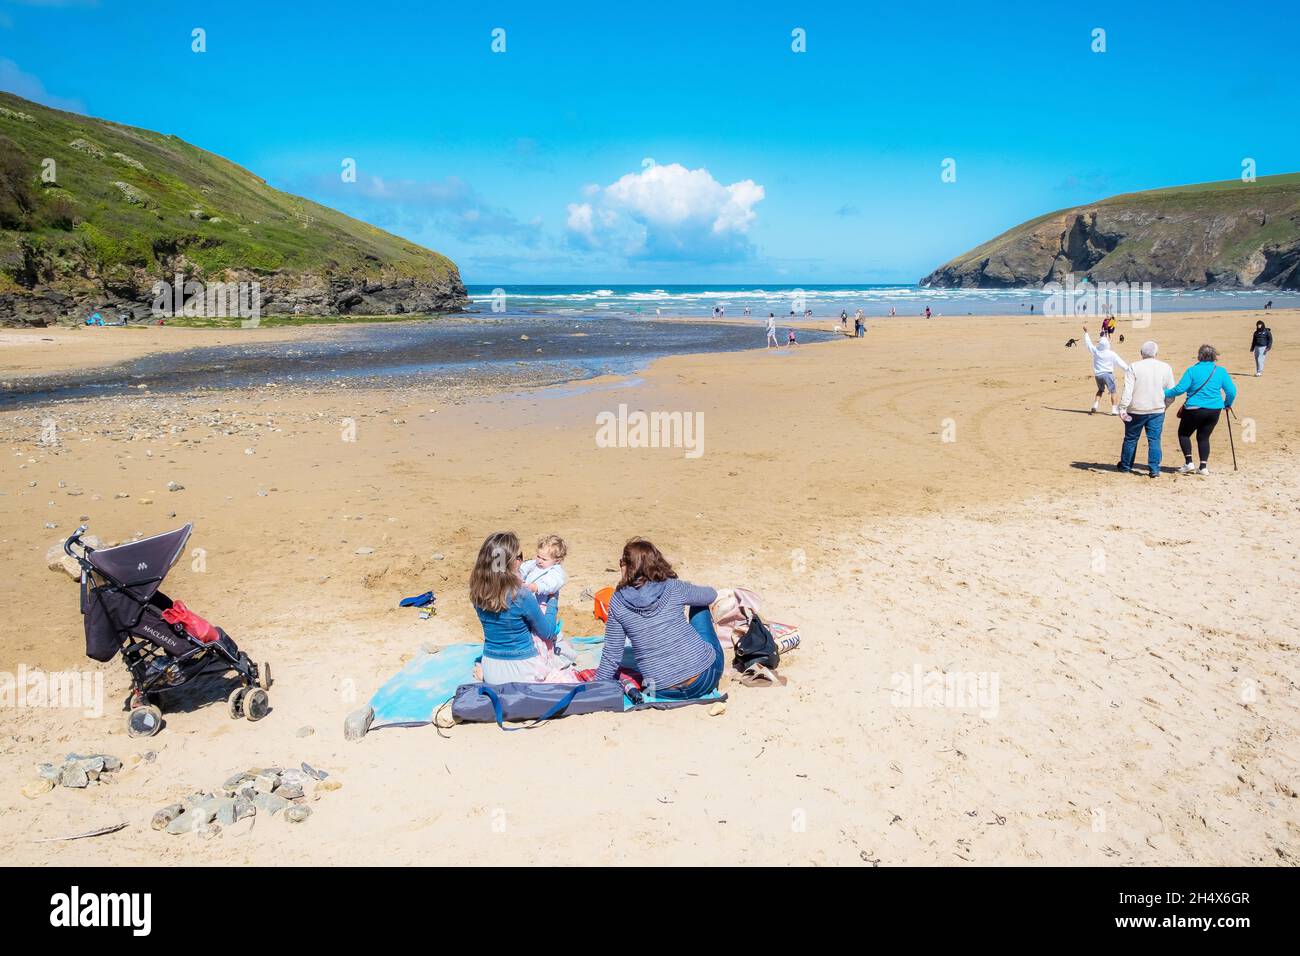 Mawgan Porth beach in Cornwall; holidaymakers enjoying the sunshine on a Cornish staycation beach holiday in the UK. Stock Photo